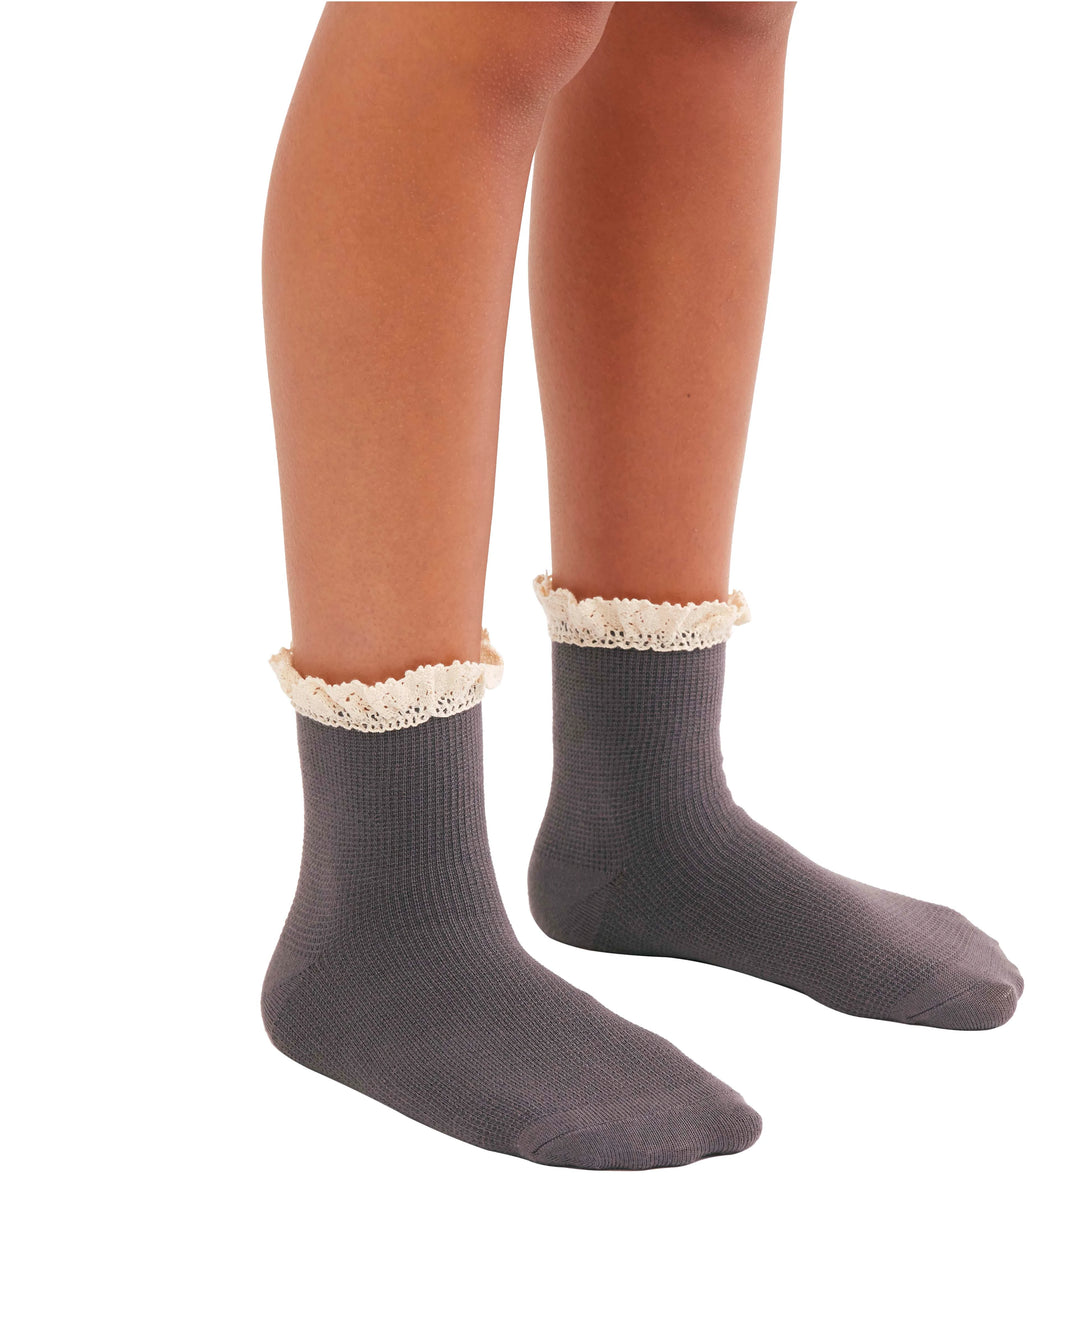 Waffle Knit Ankle Socks in Shark - Madison's Niche 